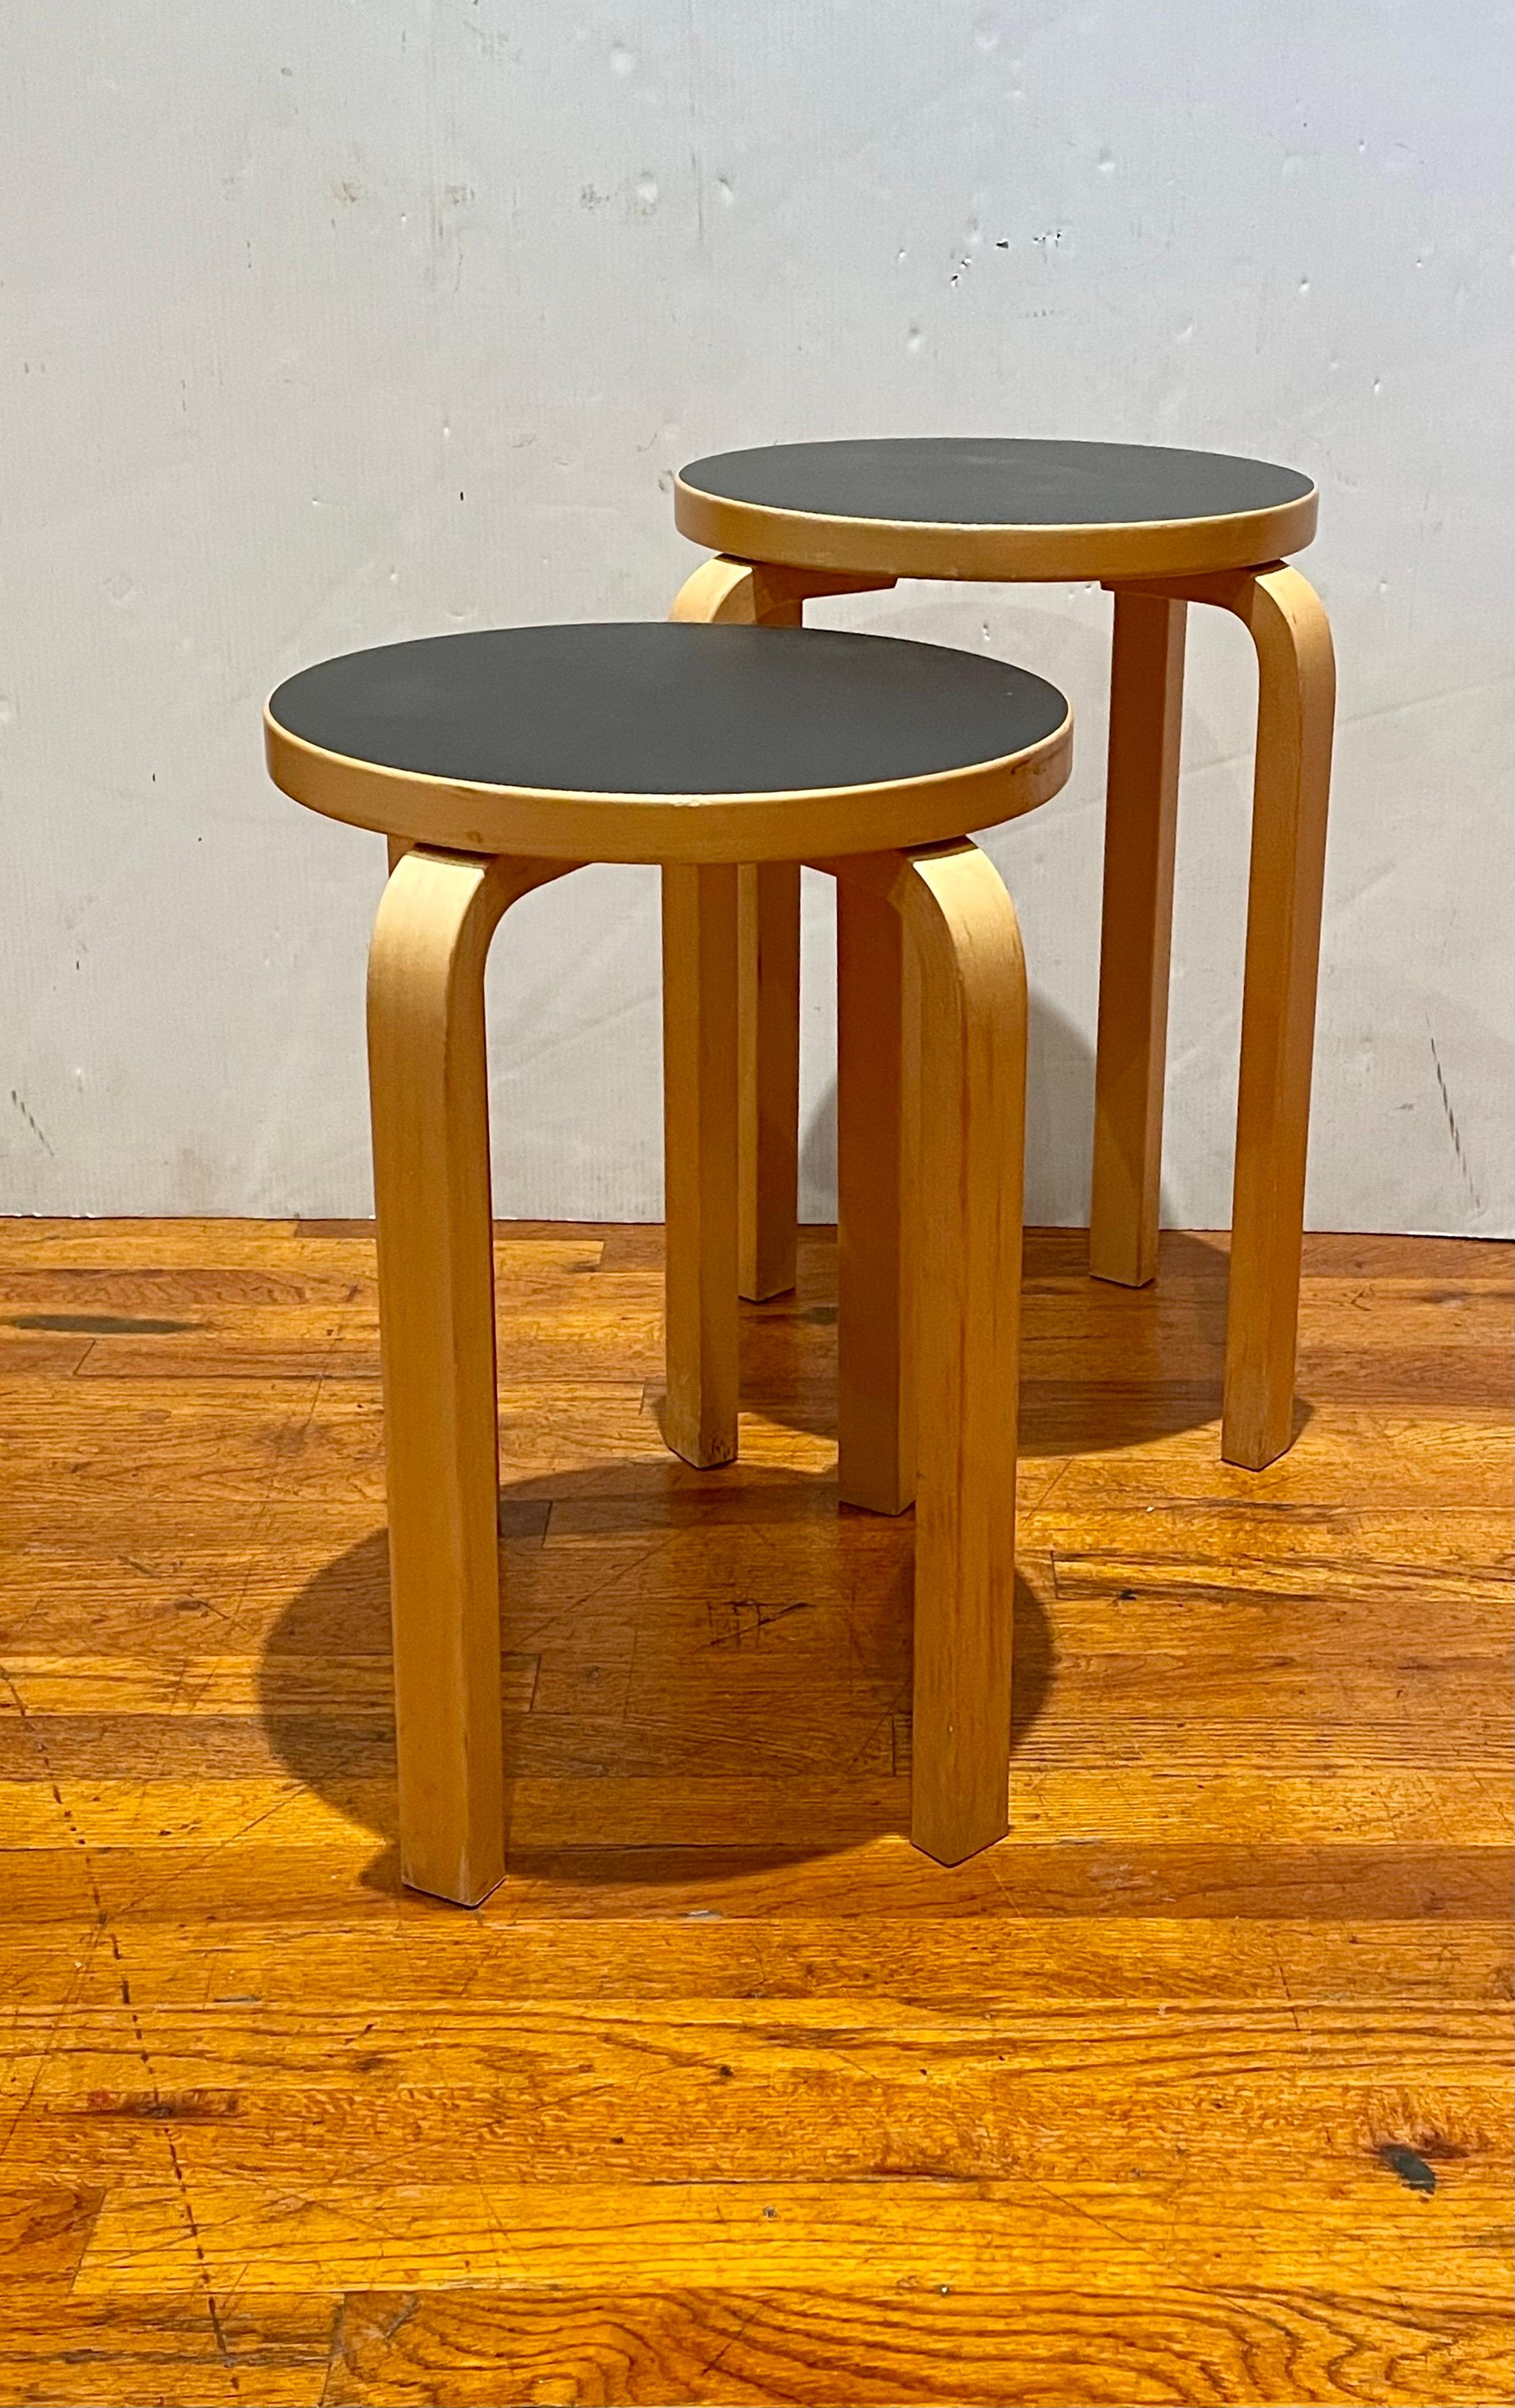 Vintage Alvar Aalto model 60 linoleum top stool. Birch bentwood legs with Aalto’s signature feathered bentwood leg design. Original Finish nice vintage condition 2 different sizes available price per stool please specify which size do you want,